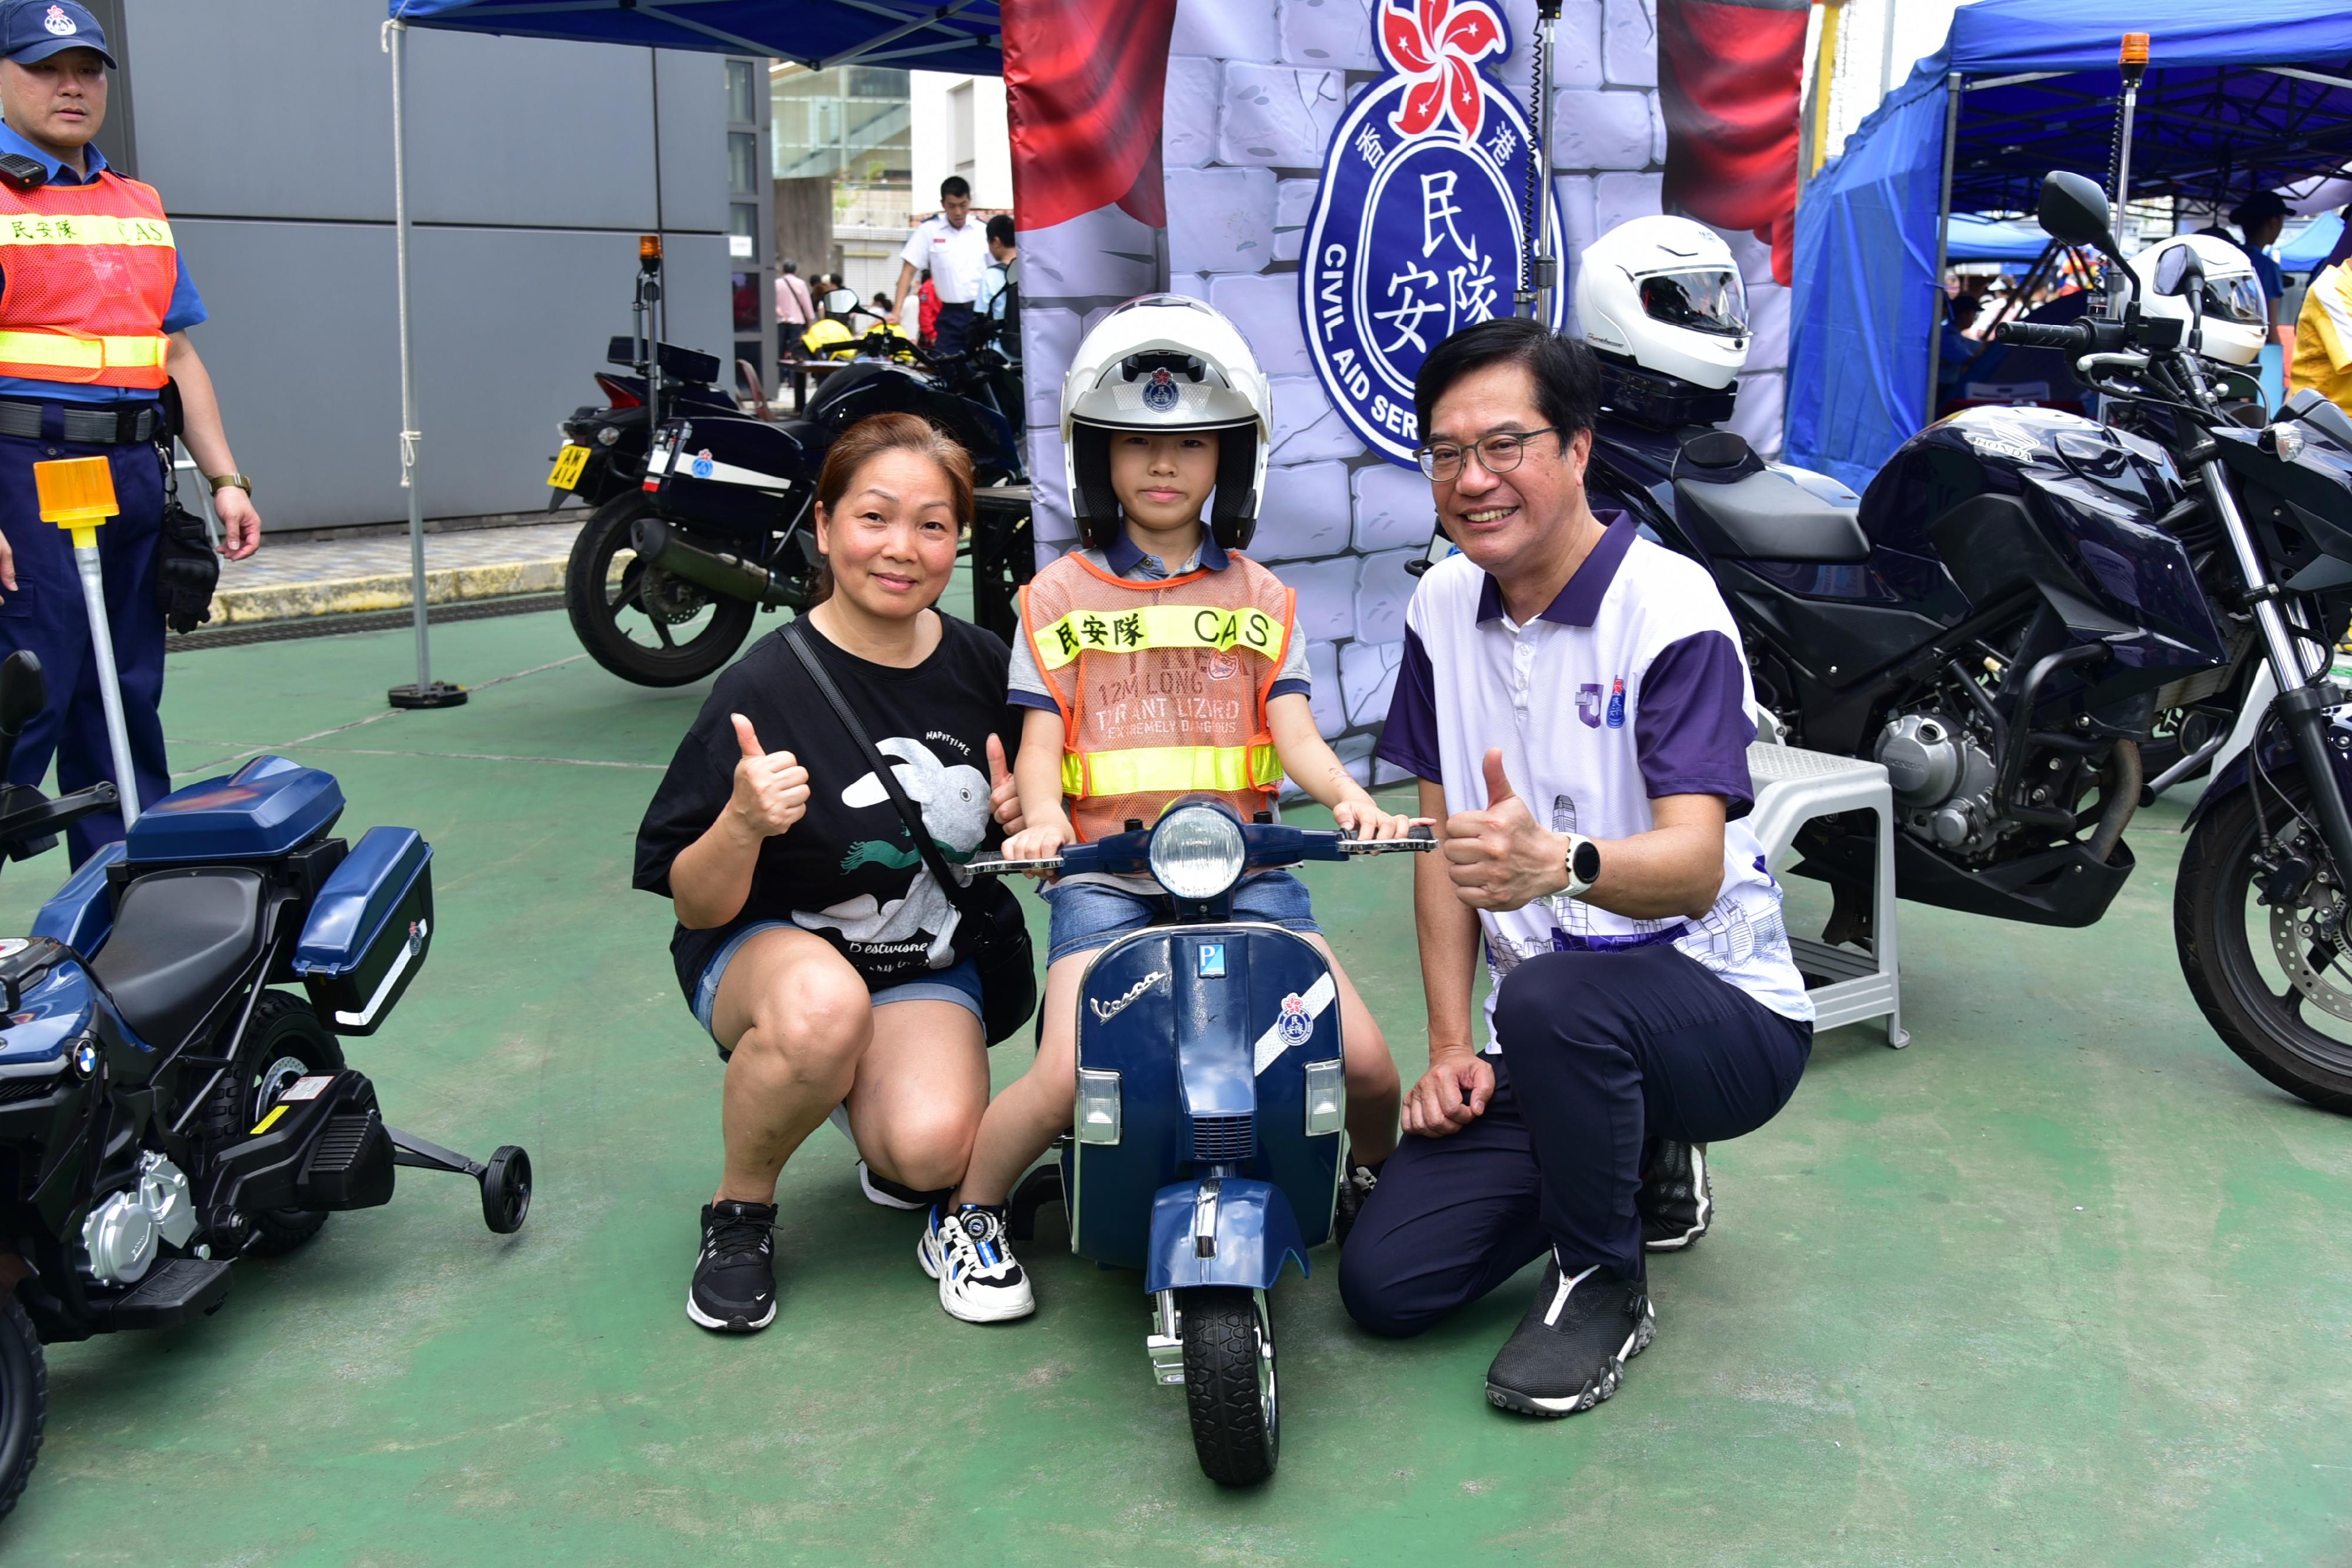 The Civil Aid Service held an open day at its headquarters today (April 14) to promote the National Security Education Day. Photo shows the Deputy Financial Secretary, Mr Michael Wong (first right), with members of the public and search and rescue vehicles.